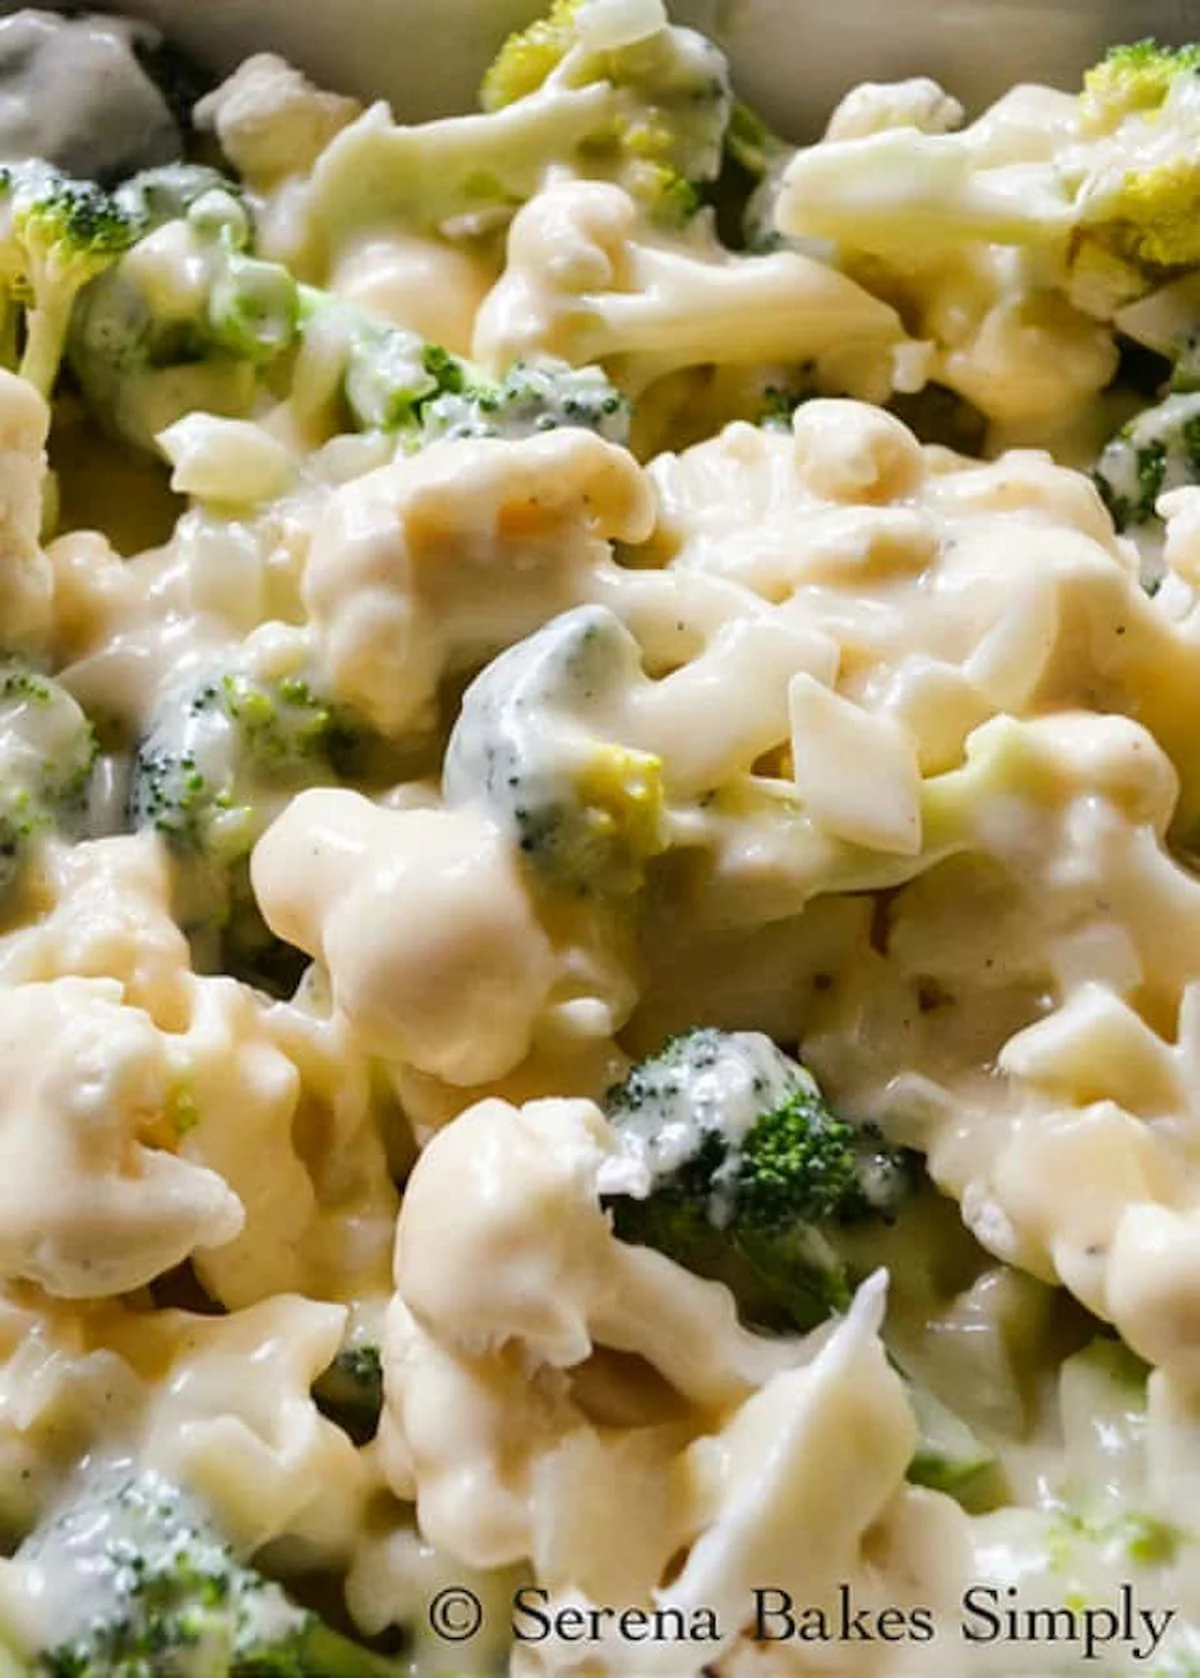 Cheesy Broccoli Cauliflower Casserole layered with homemade cheese sauce from Serena Bakes Simply From Scratch.